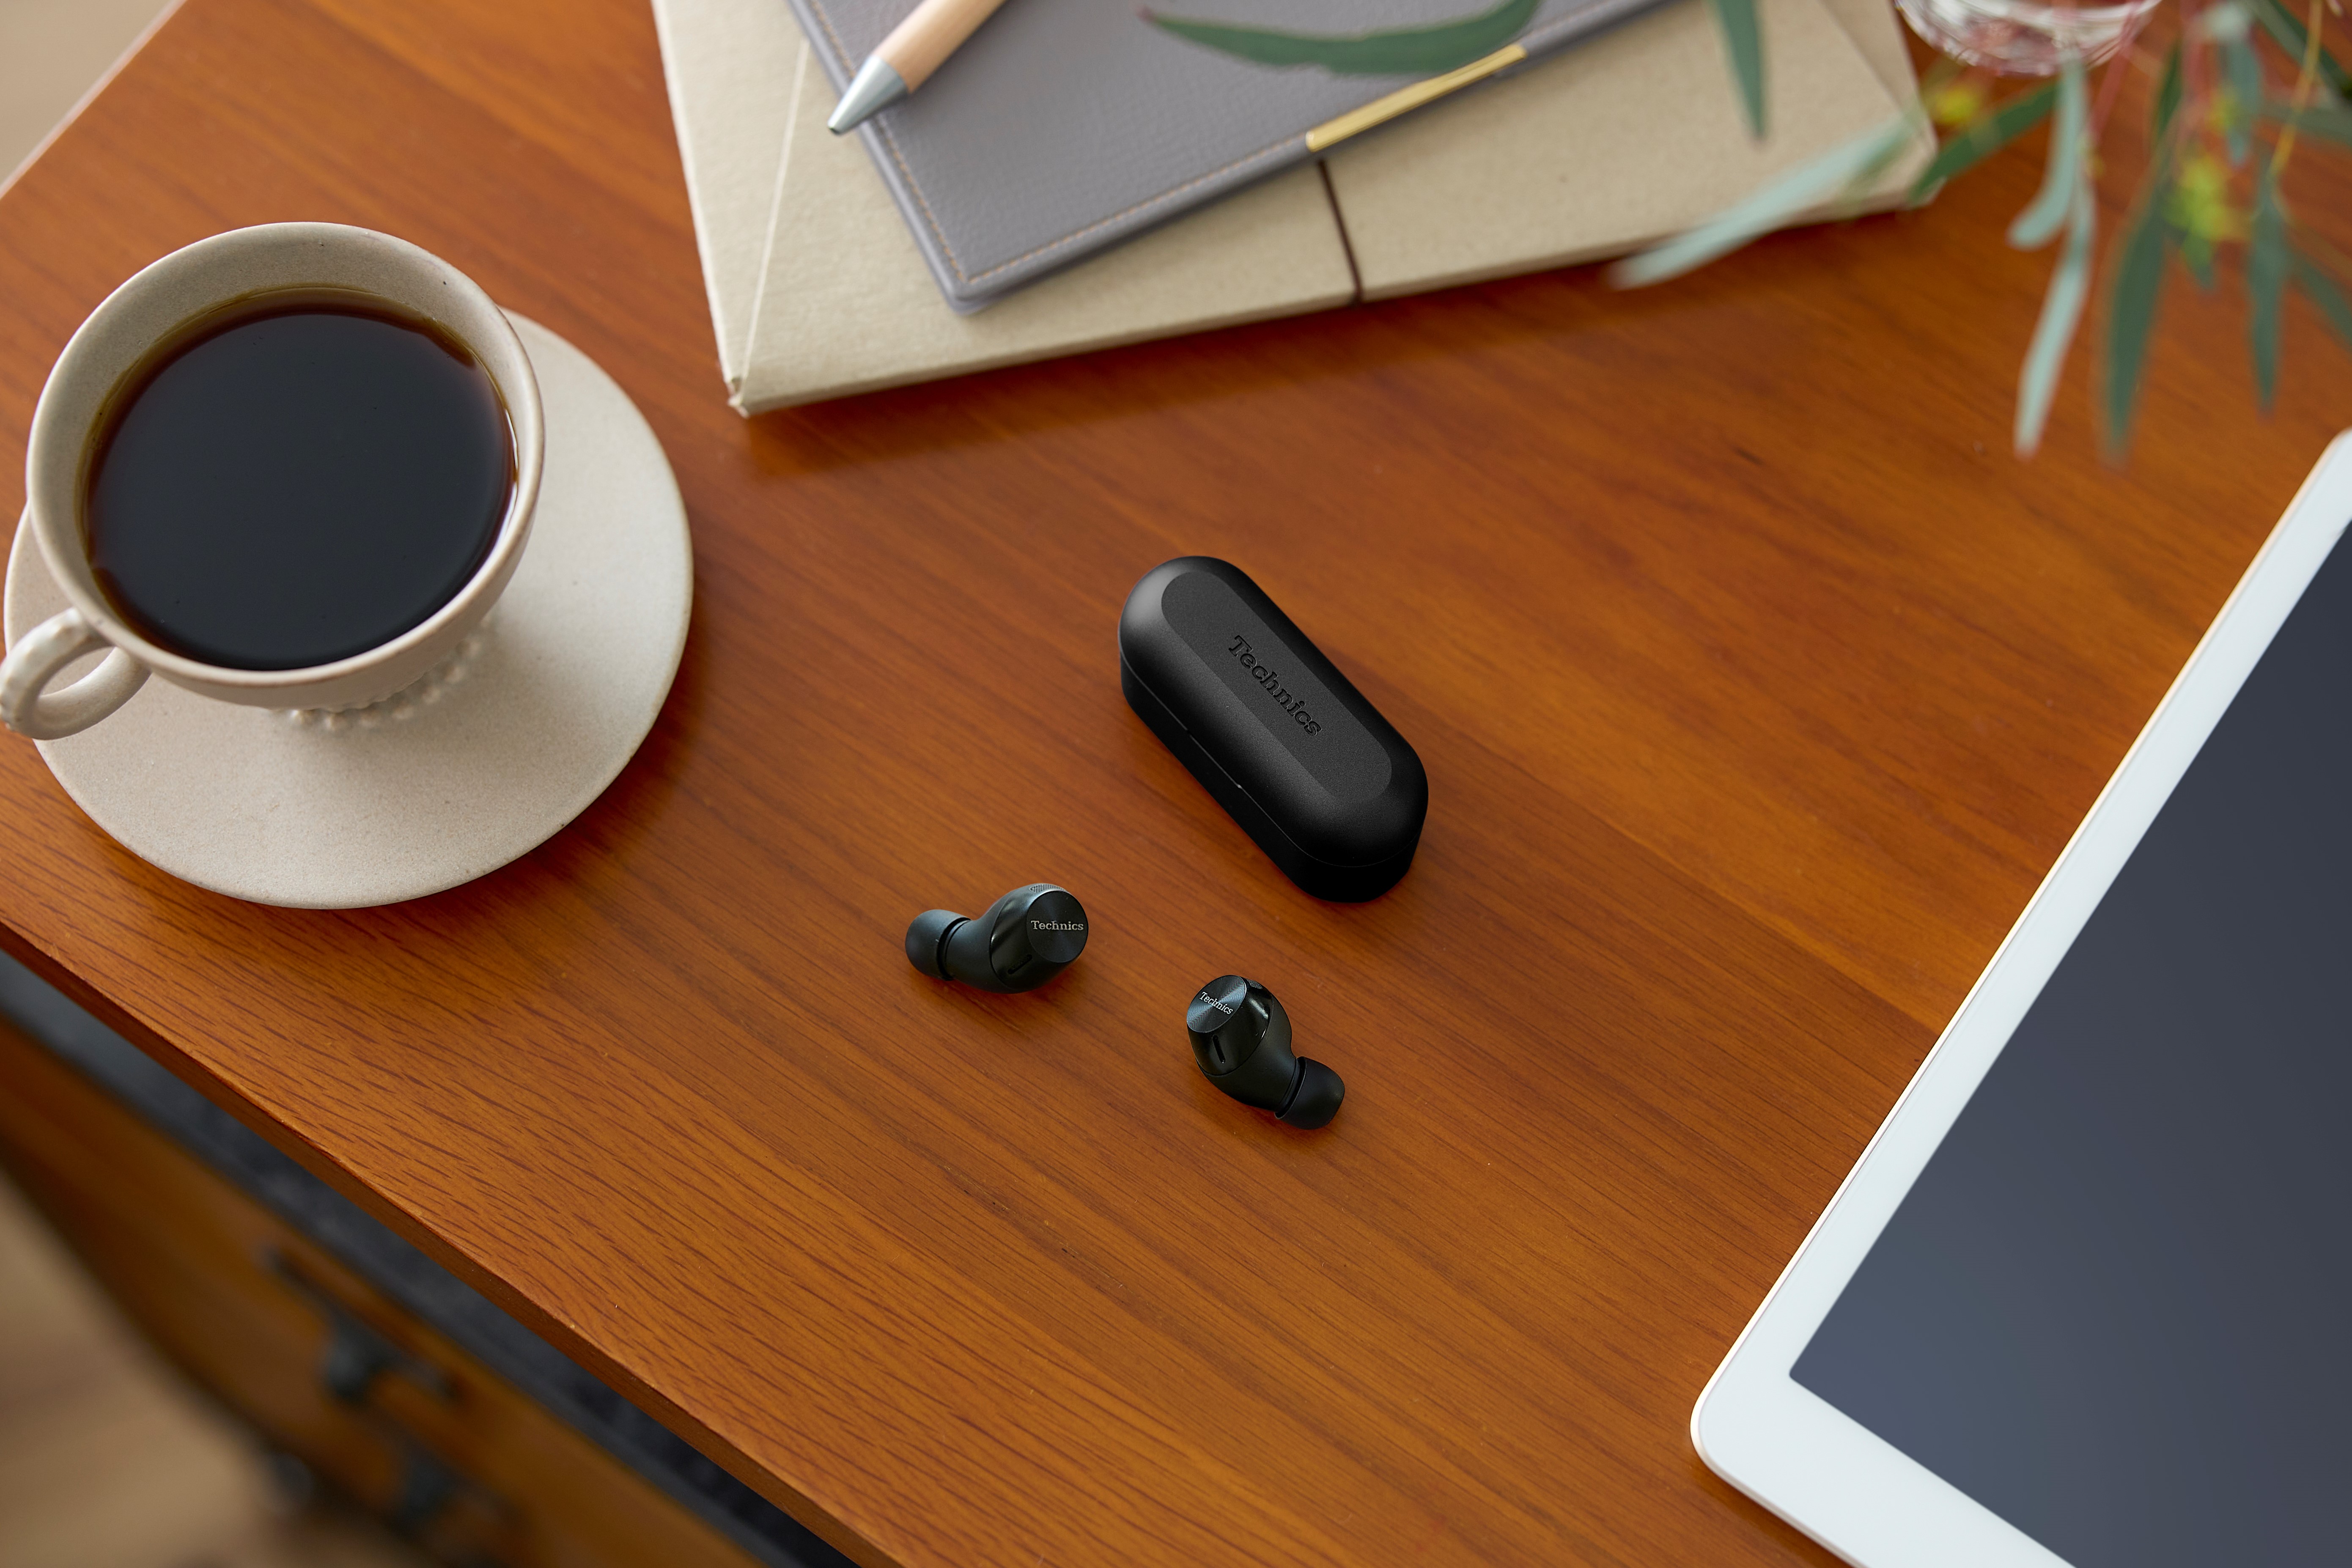 Next Generation True Wireless earbuds with the new compact and lightweight EAH-AZ40M2